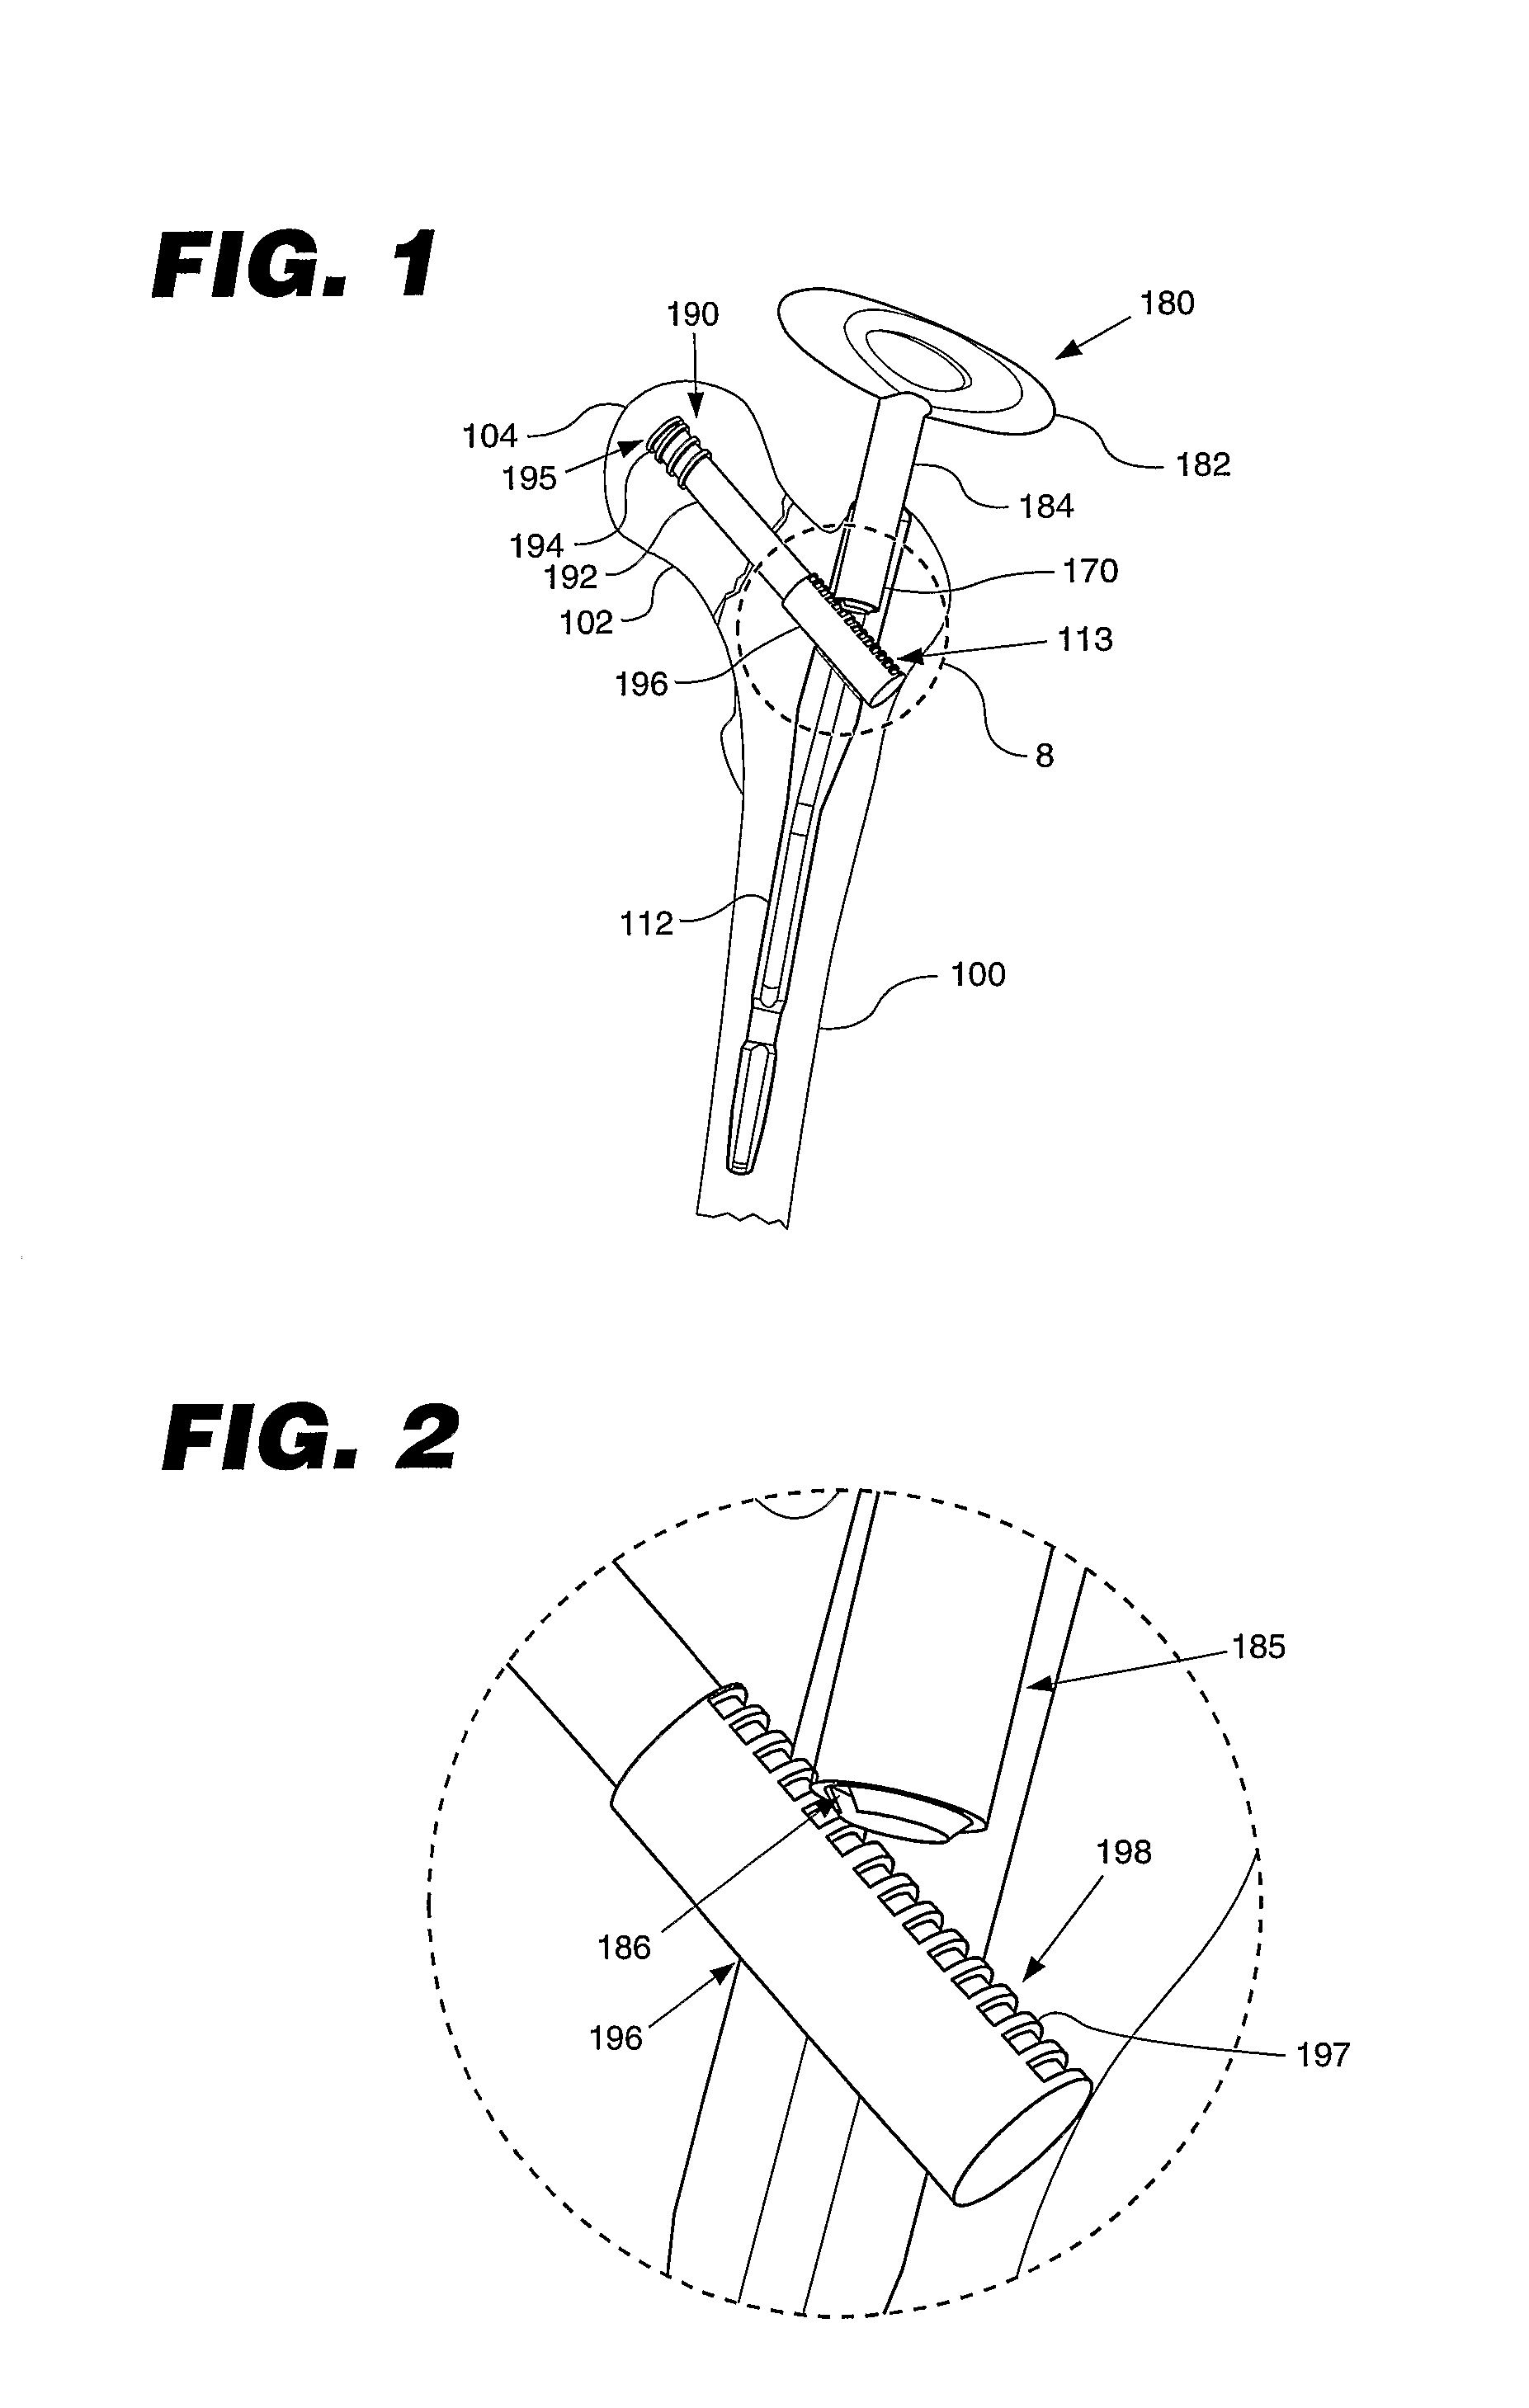 Methods and Instruments of Reducing a Fracture